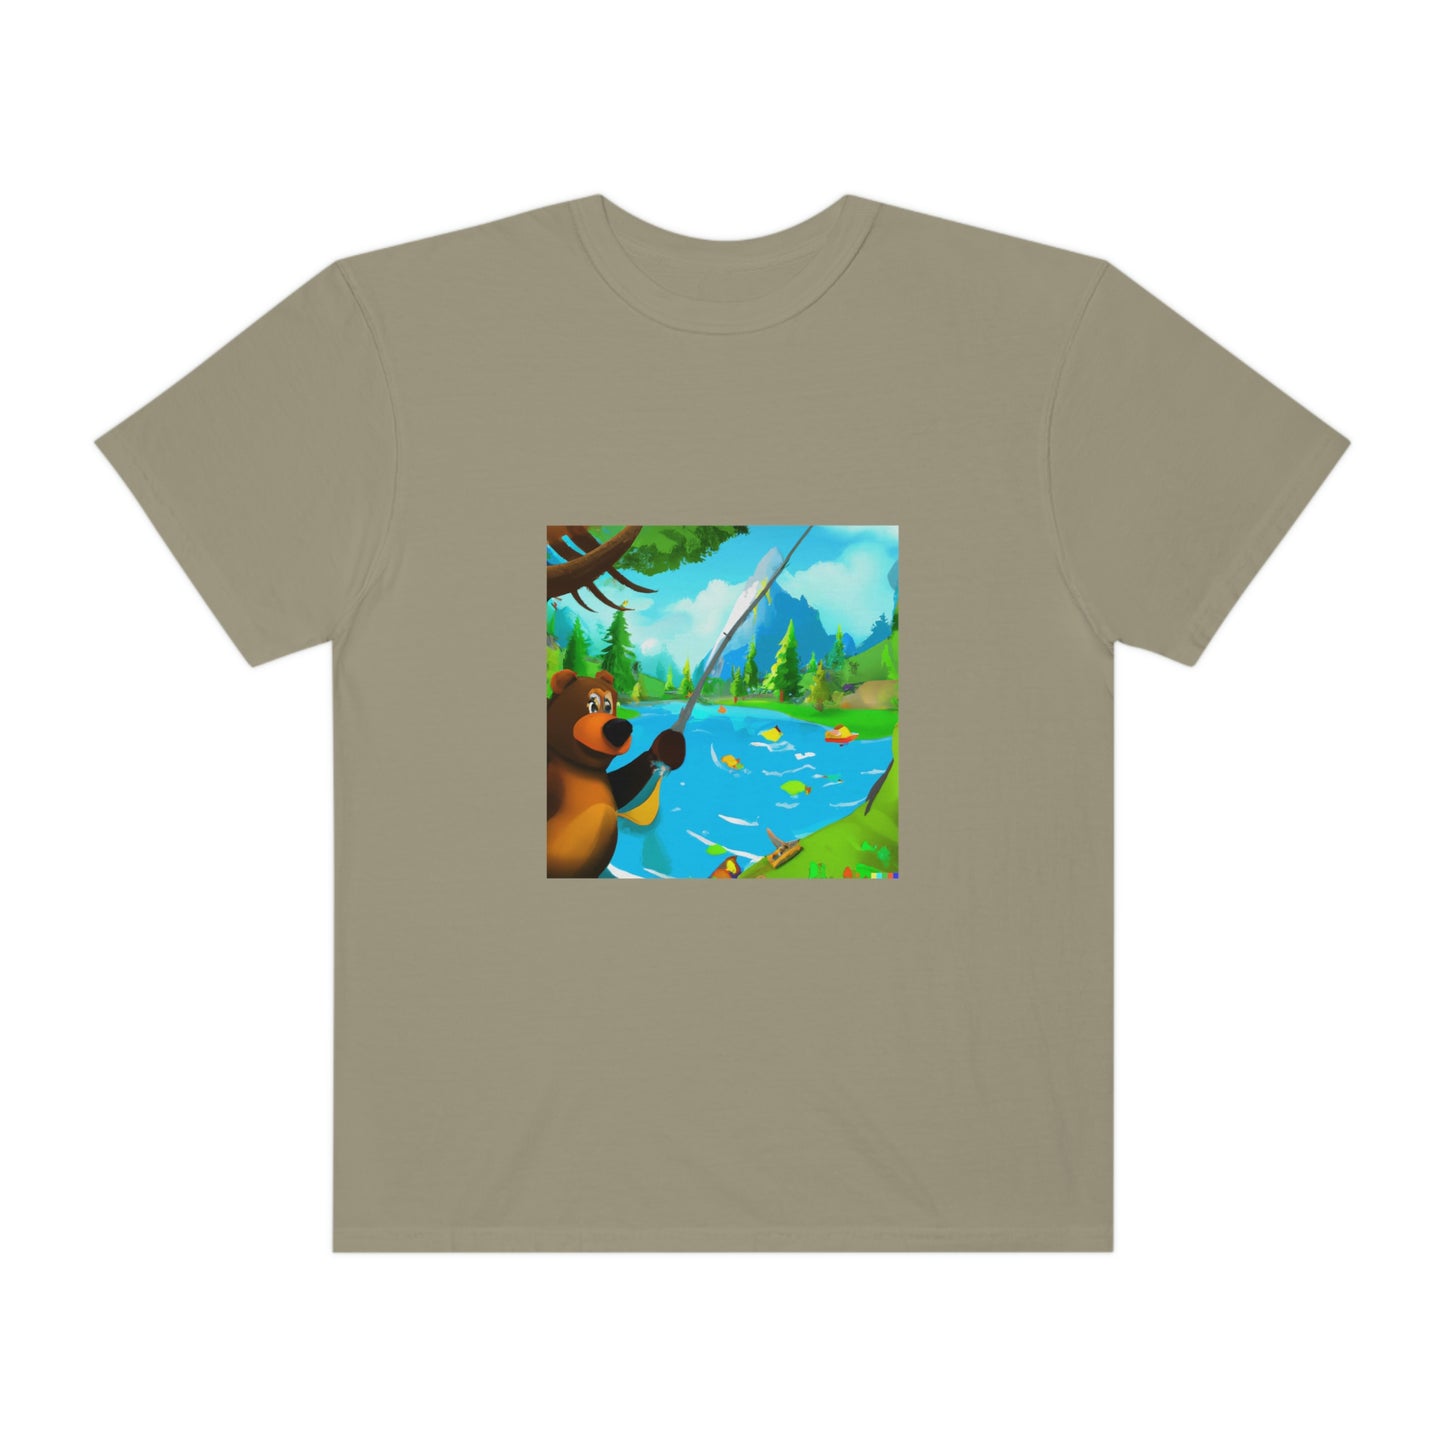 A Comfortable Tee  Get in Touch with Nature and Show Your Love for Fishing with Konaloo's Bear Fishing at Lake Garment-Dyed T-Shirt